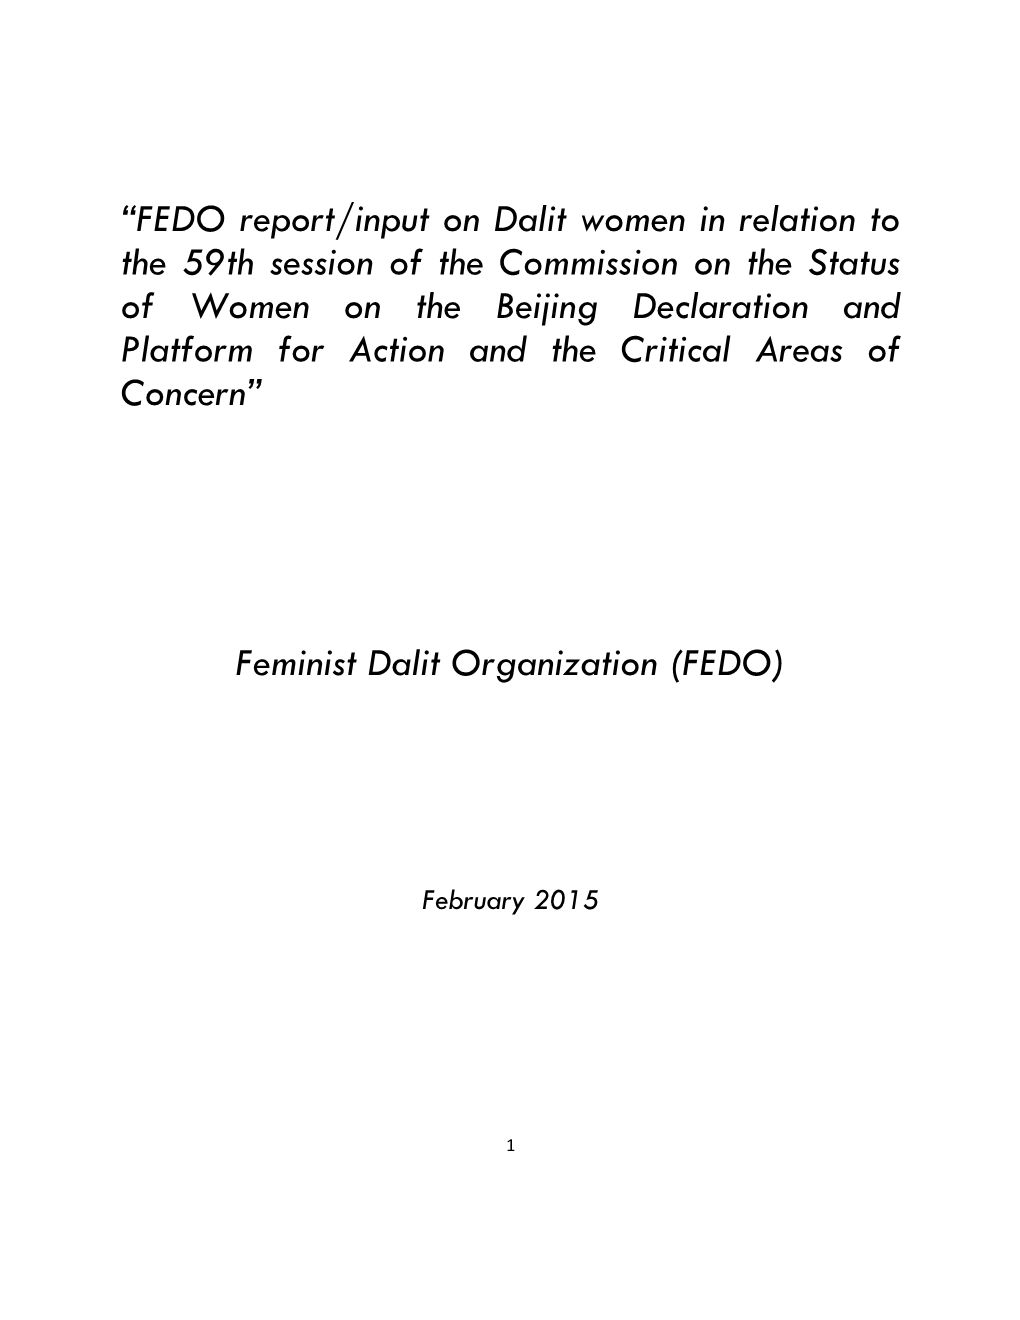 Report on Dalit Women and Critical